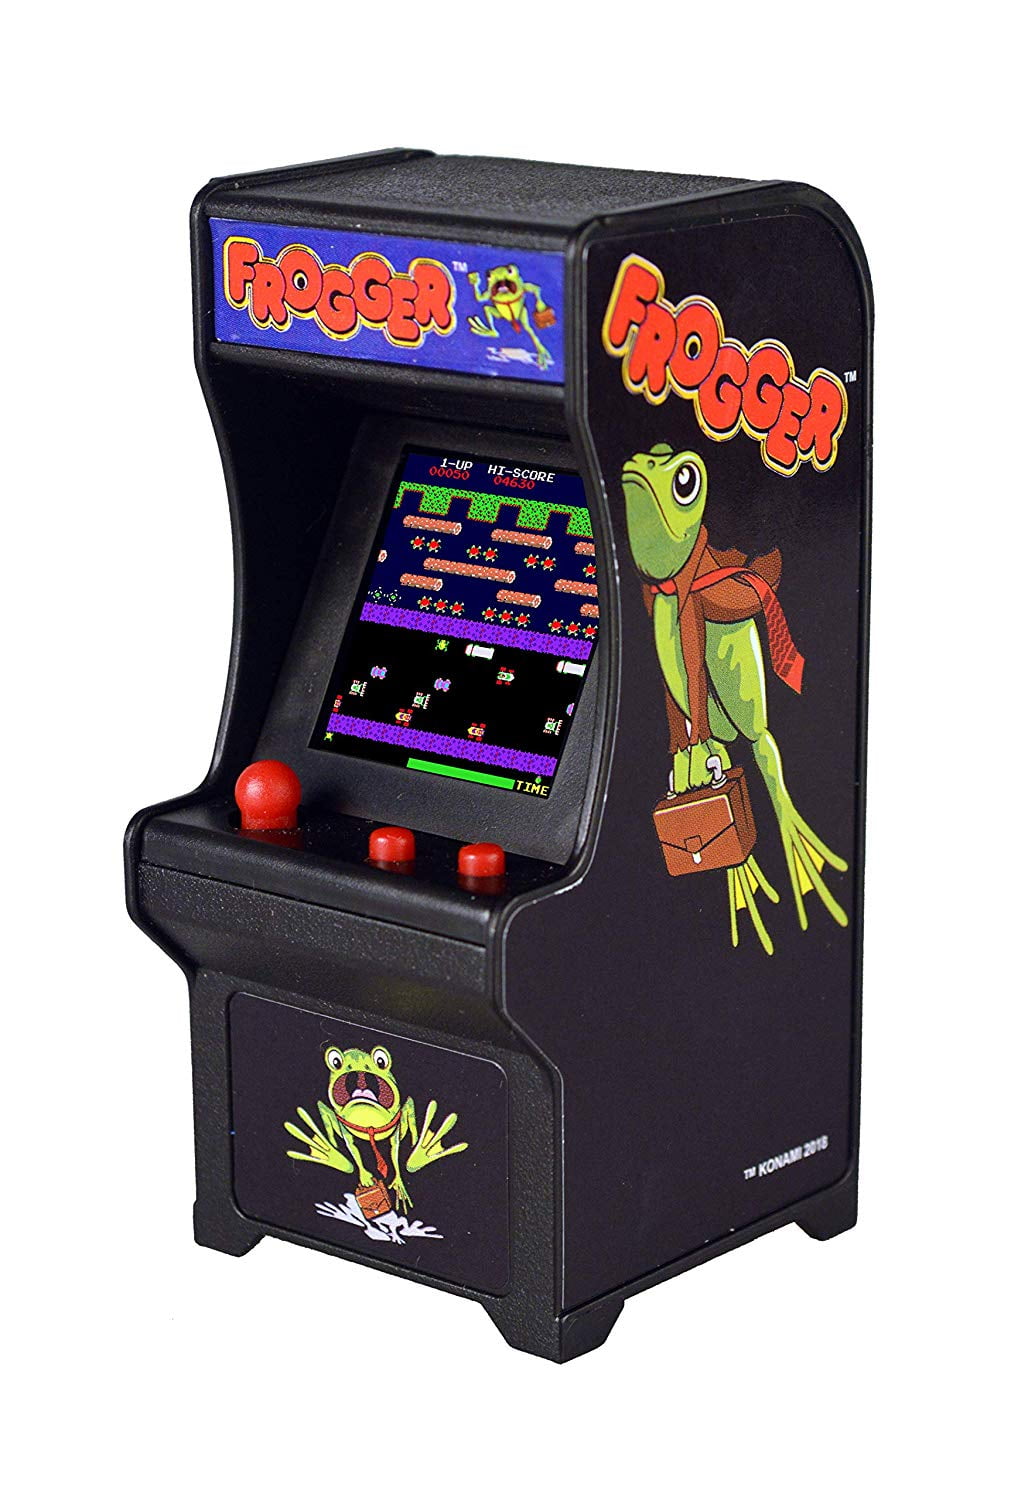 Frogger Refrigerator magnet Video Game 2" By 3" 